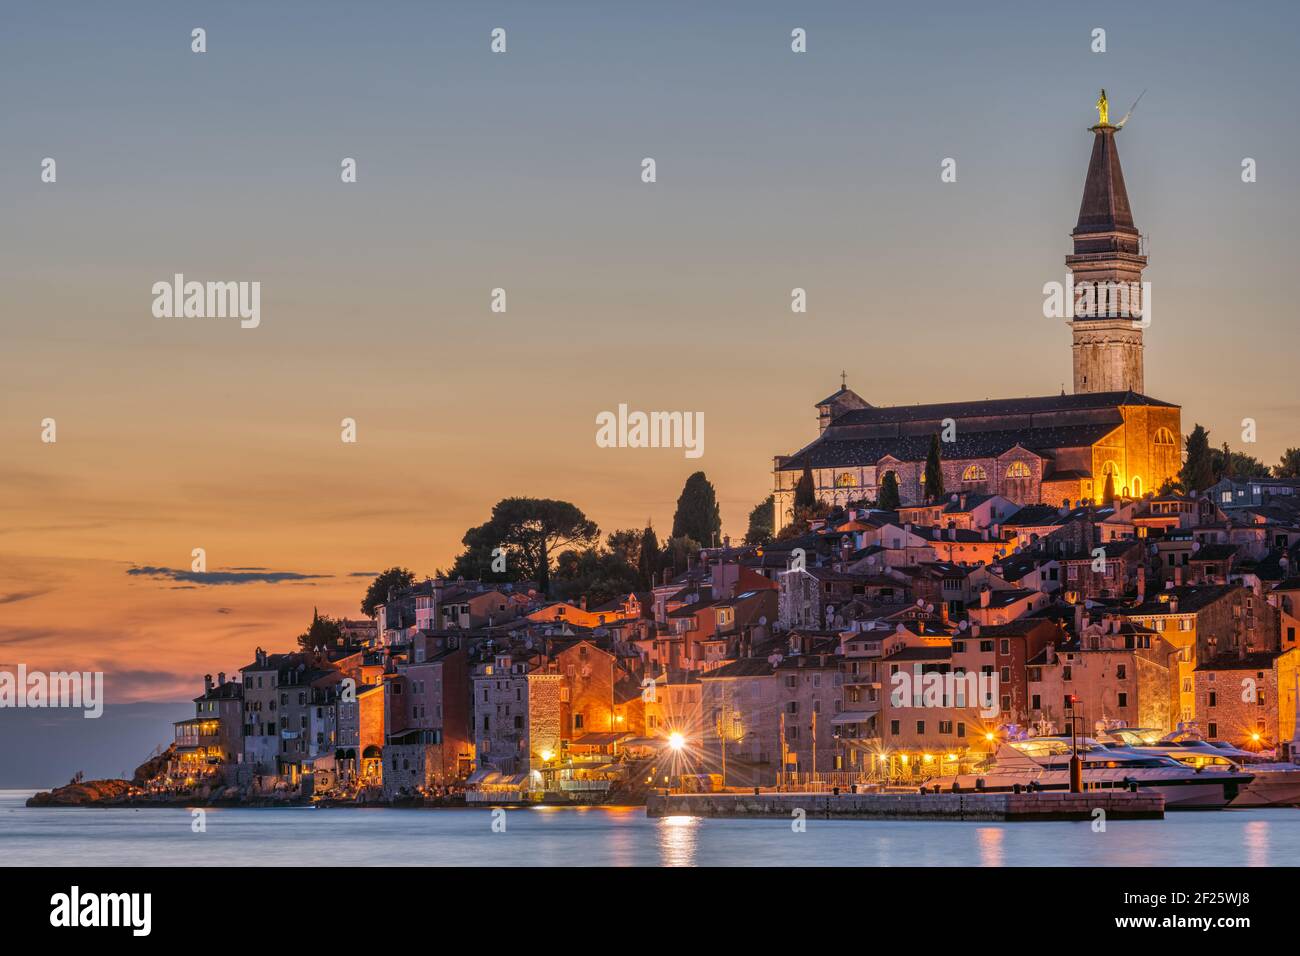 View to the beautiful old town of Rovinj in Croatia after sunset Stock Photo